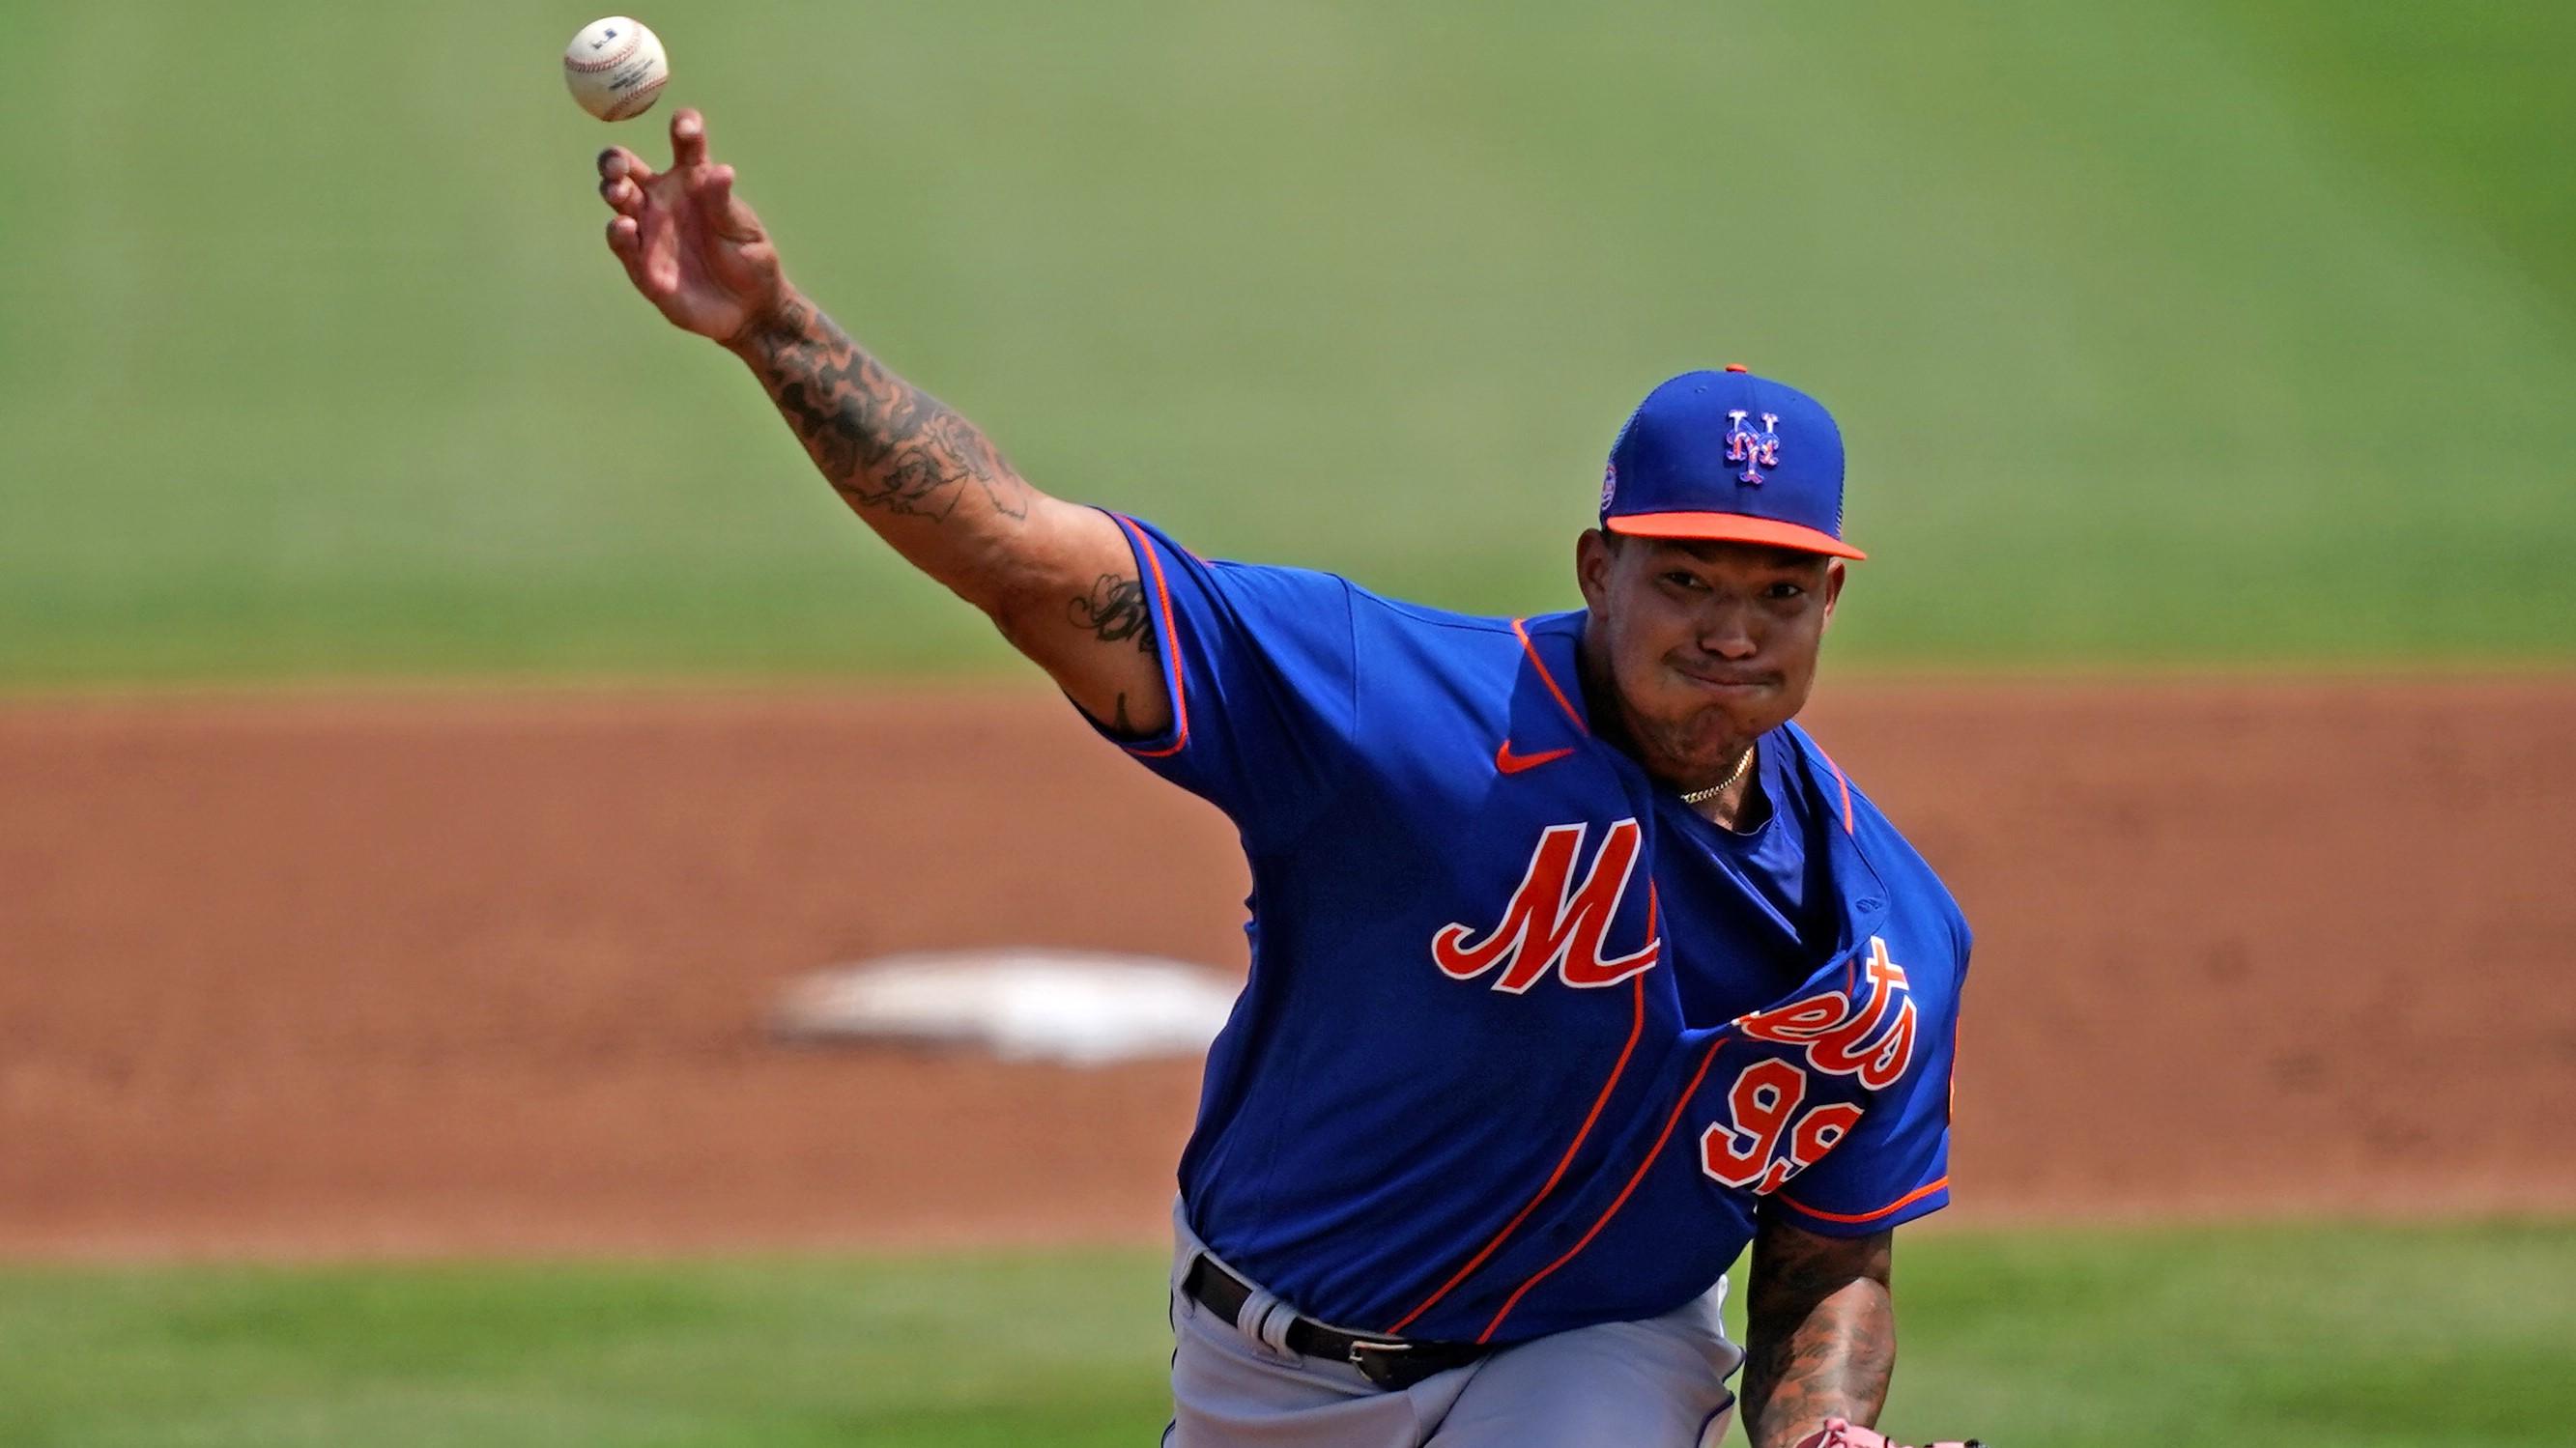 Mar 29, 2021; Jupiter, Florida, USA; New York Mets starting pitcher Taijuan Walker (99) delivers a pitch in the 2nd inning of the spring training game against the St. Louis Cardinals at Roger Dean Chevrolet Stadium / Jasen Vinlove-USA TODAY Sports